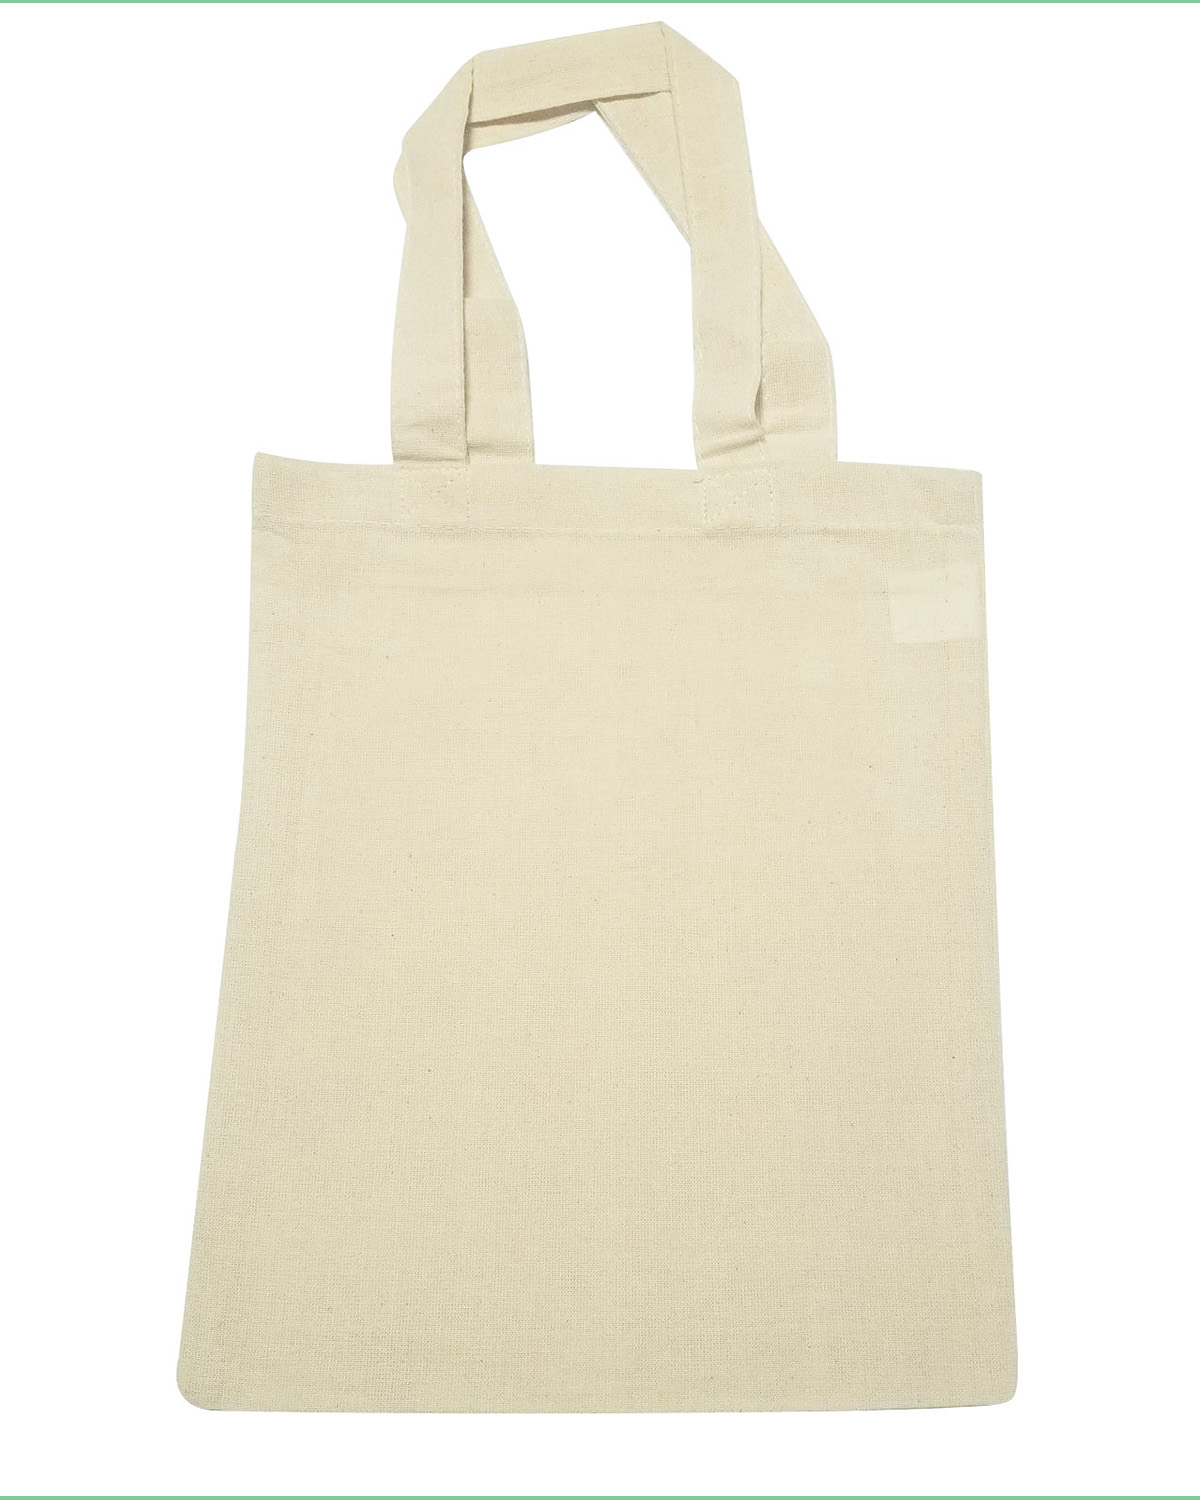 ''Natural Cotton Canvas Tote Bags - 9'''' x 11''''''